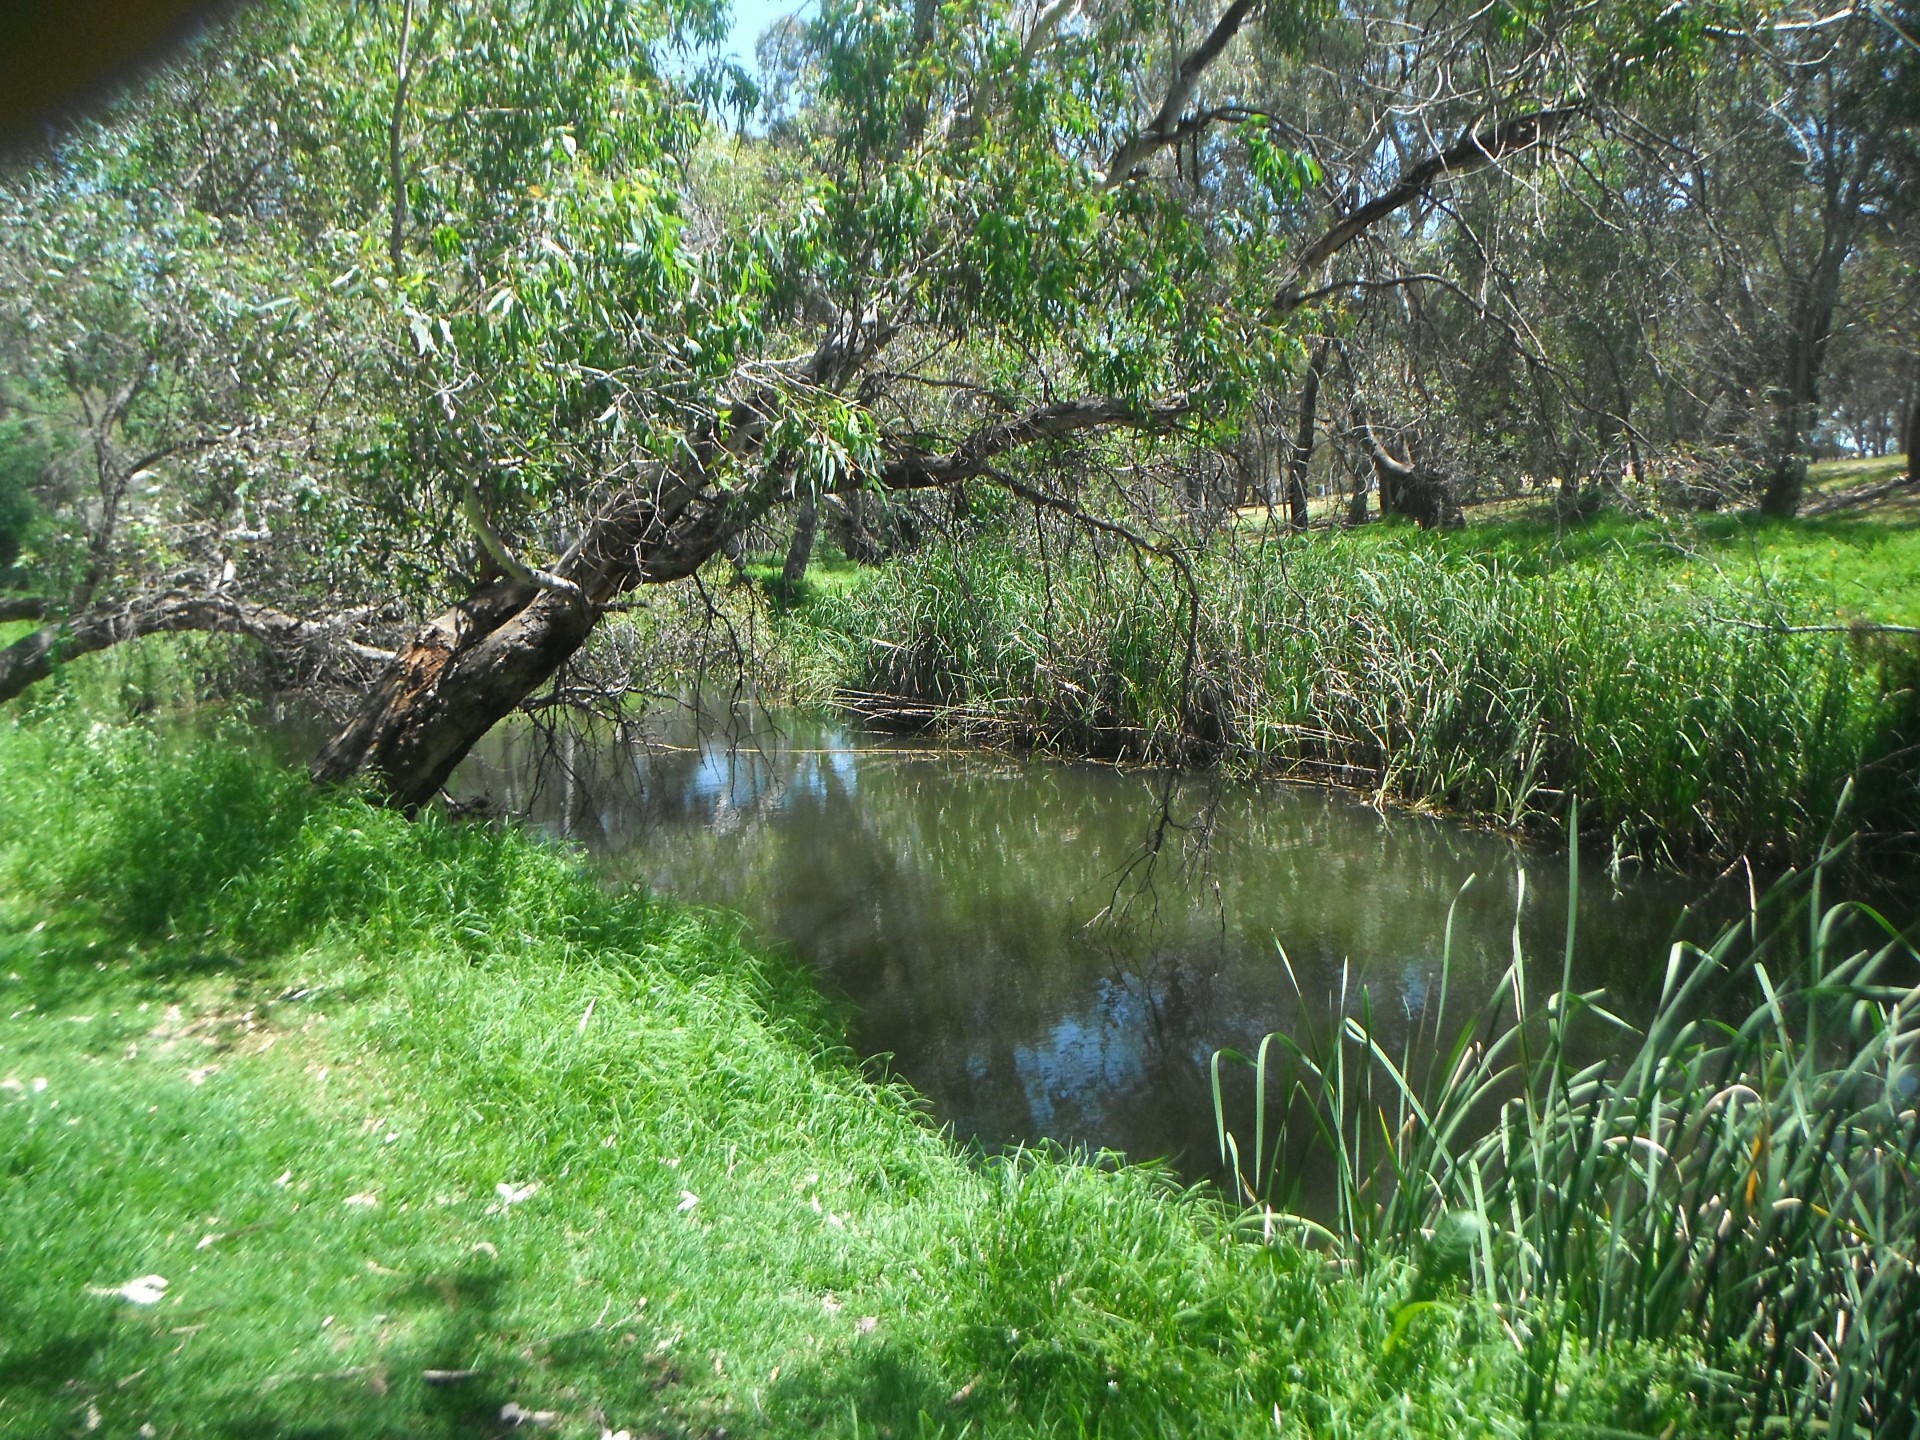 This small river flows through the Adelaide and its suburbs,which makes this a quite place to be.